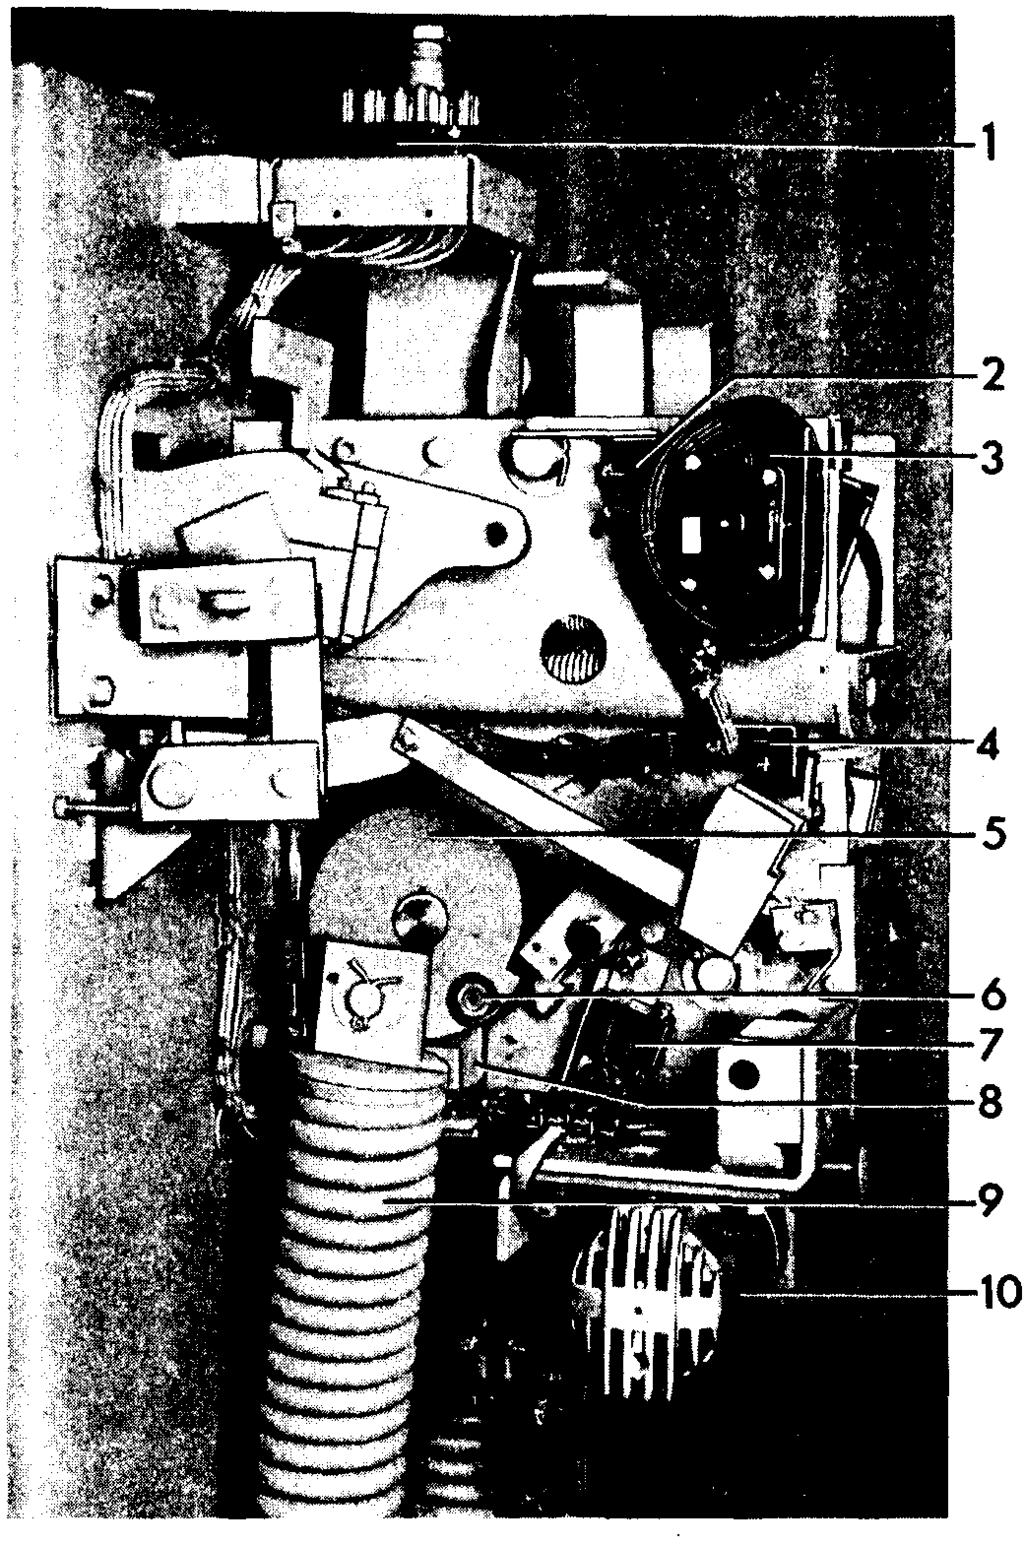 .t Breaker GEK-31111 Figure 2. (8040932) Left Side View ML-13 Operating Mechanism 1. Secondary Coupler 2. Interlock Switches 3. Auxiliary Switch 4.